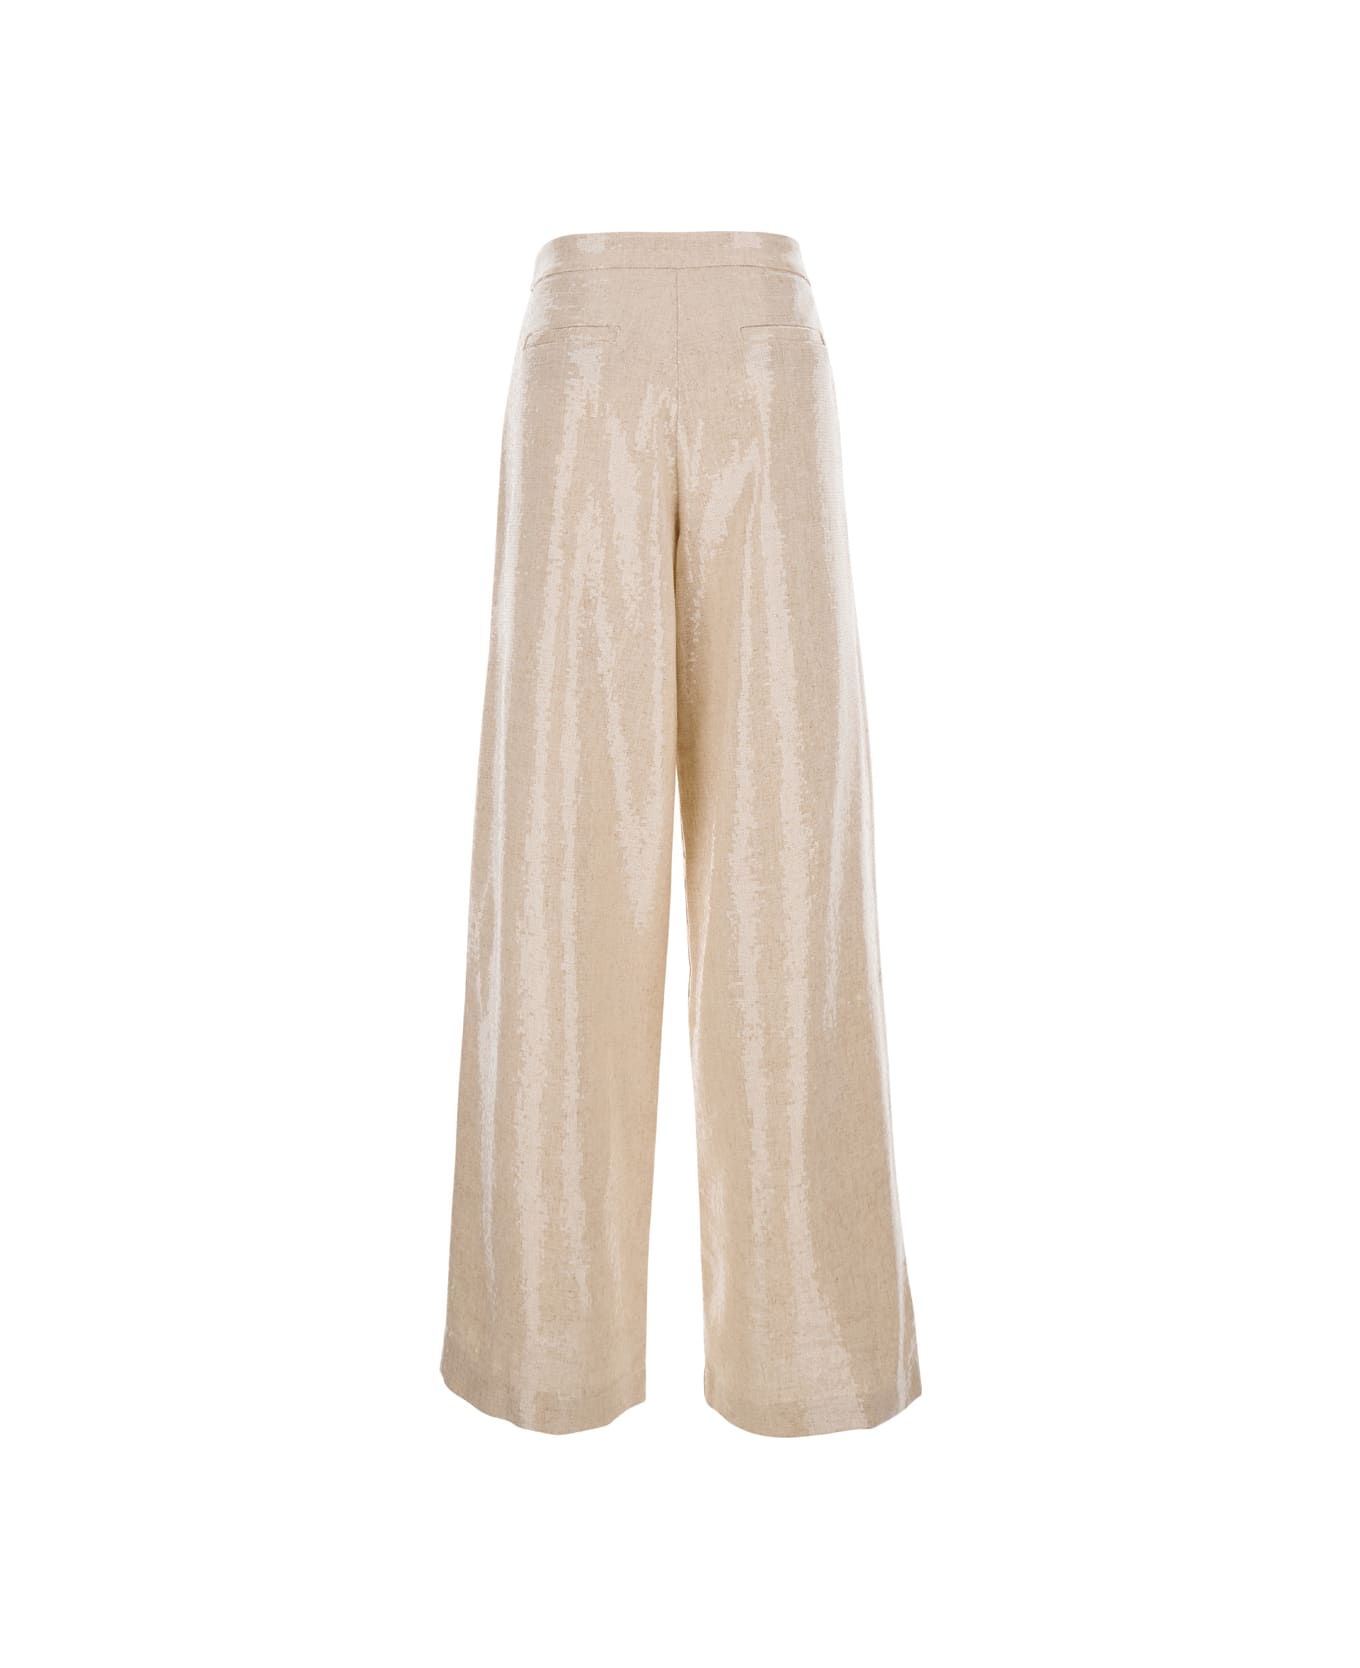 Federica Tosi Pink Trousers With Sequins In Linen Blend Woman - Beige